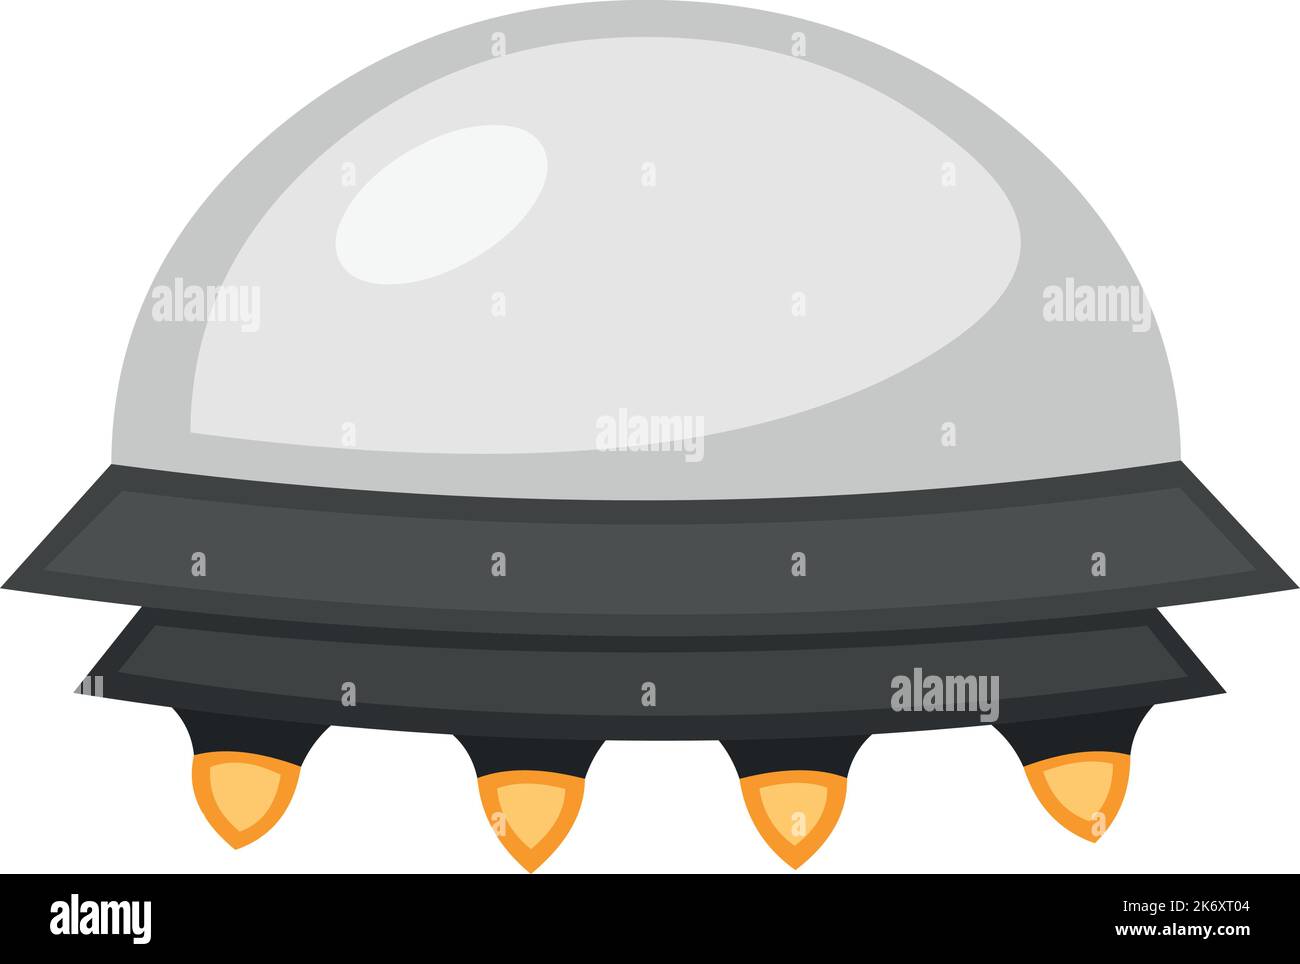 Vector illustration of a flying saucer or ufo Stock Vector